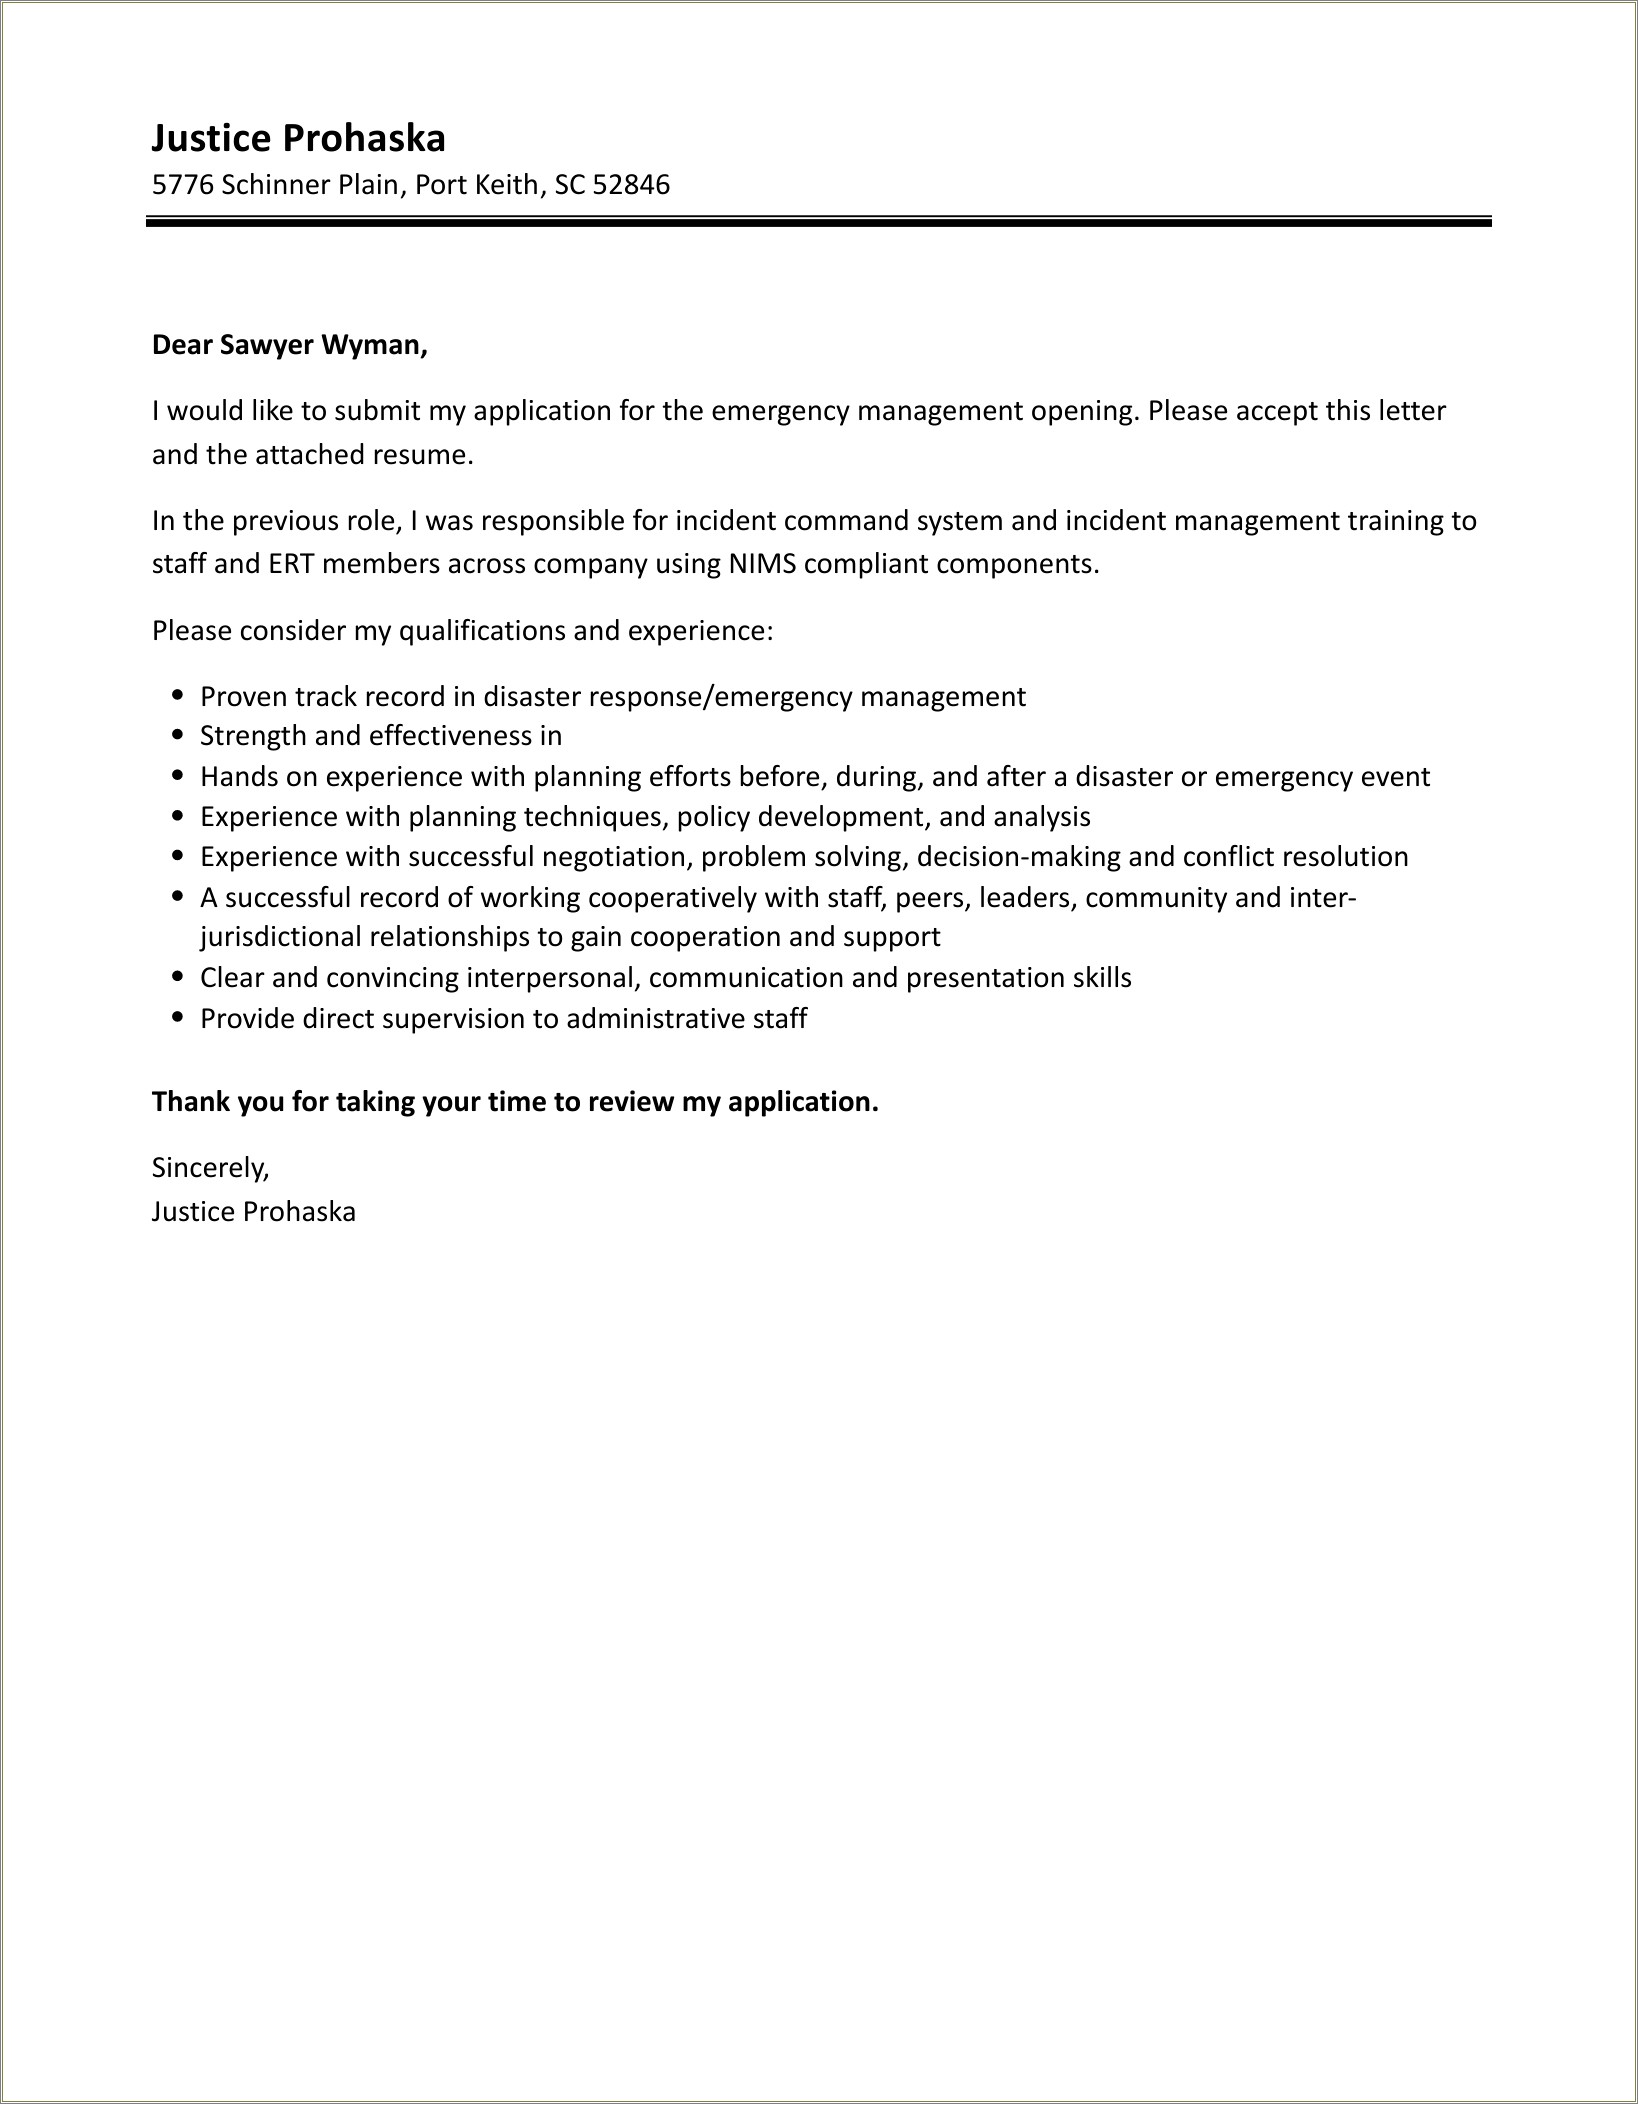 Resume Cover Letter Examples For Management